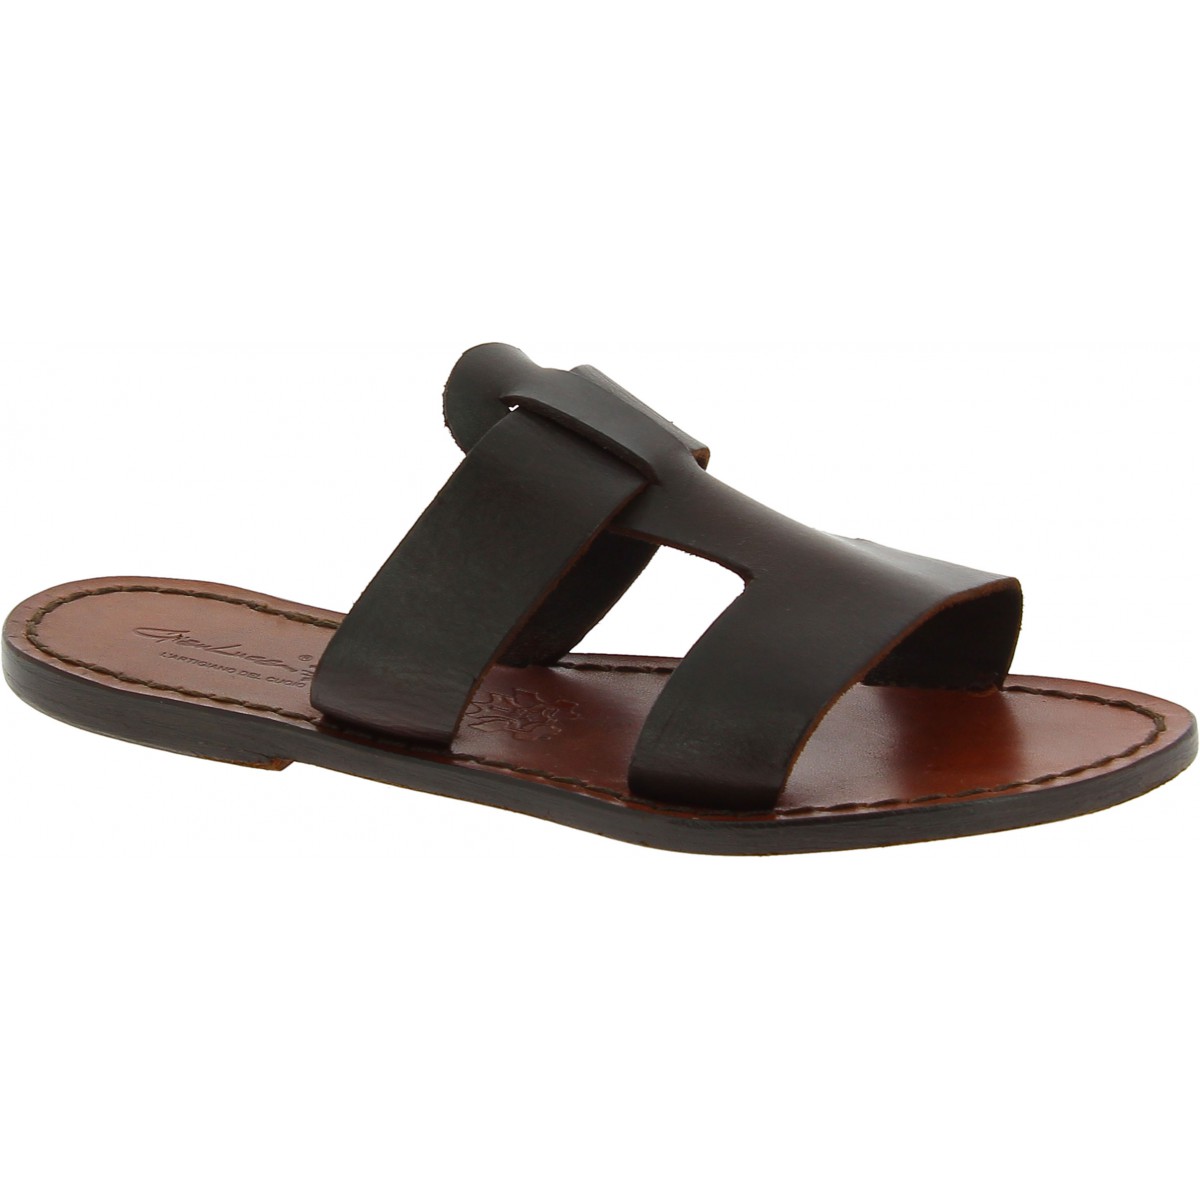 Women's leather slide sandals in dark brown leather handmade | The ...